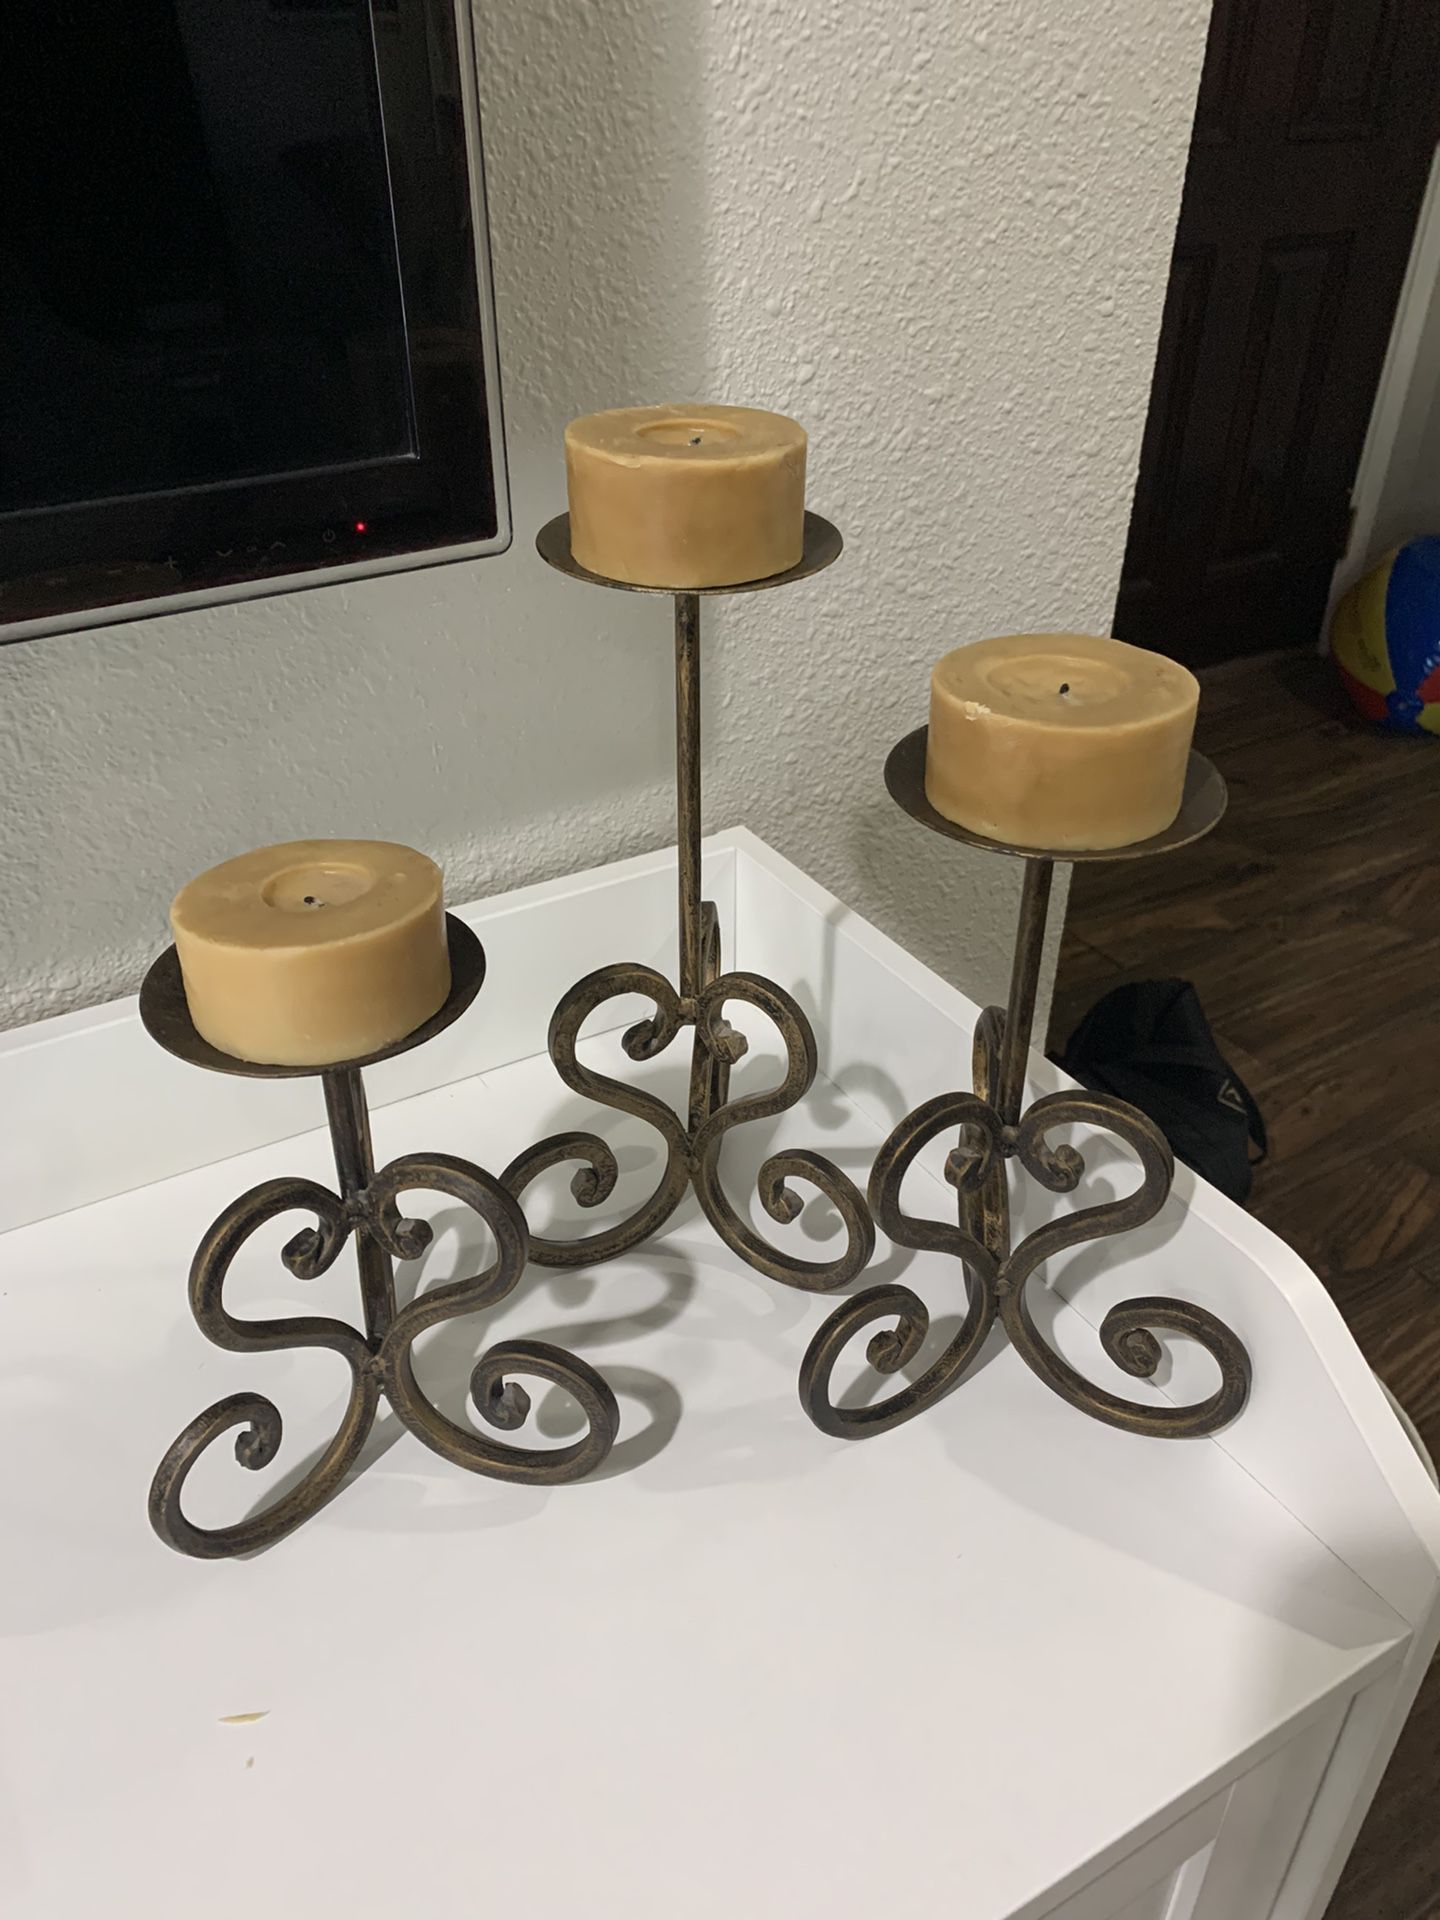 3 Wrought Iron Candle Holders And Candles 